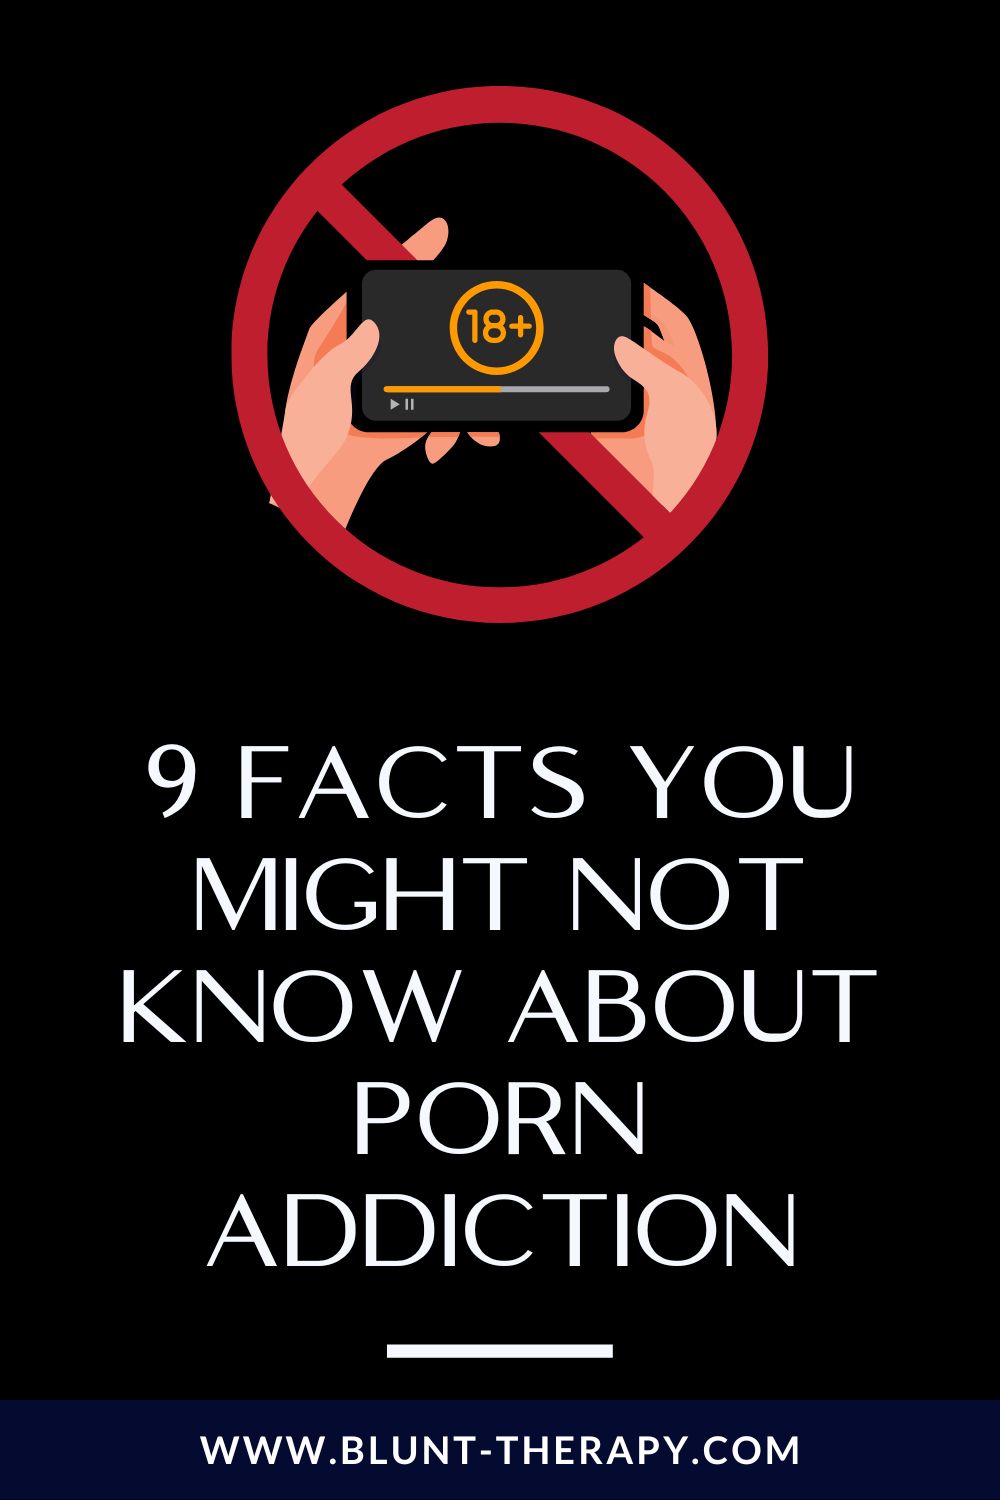 9 Facts You Might not Know About Porn Addiction